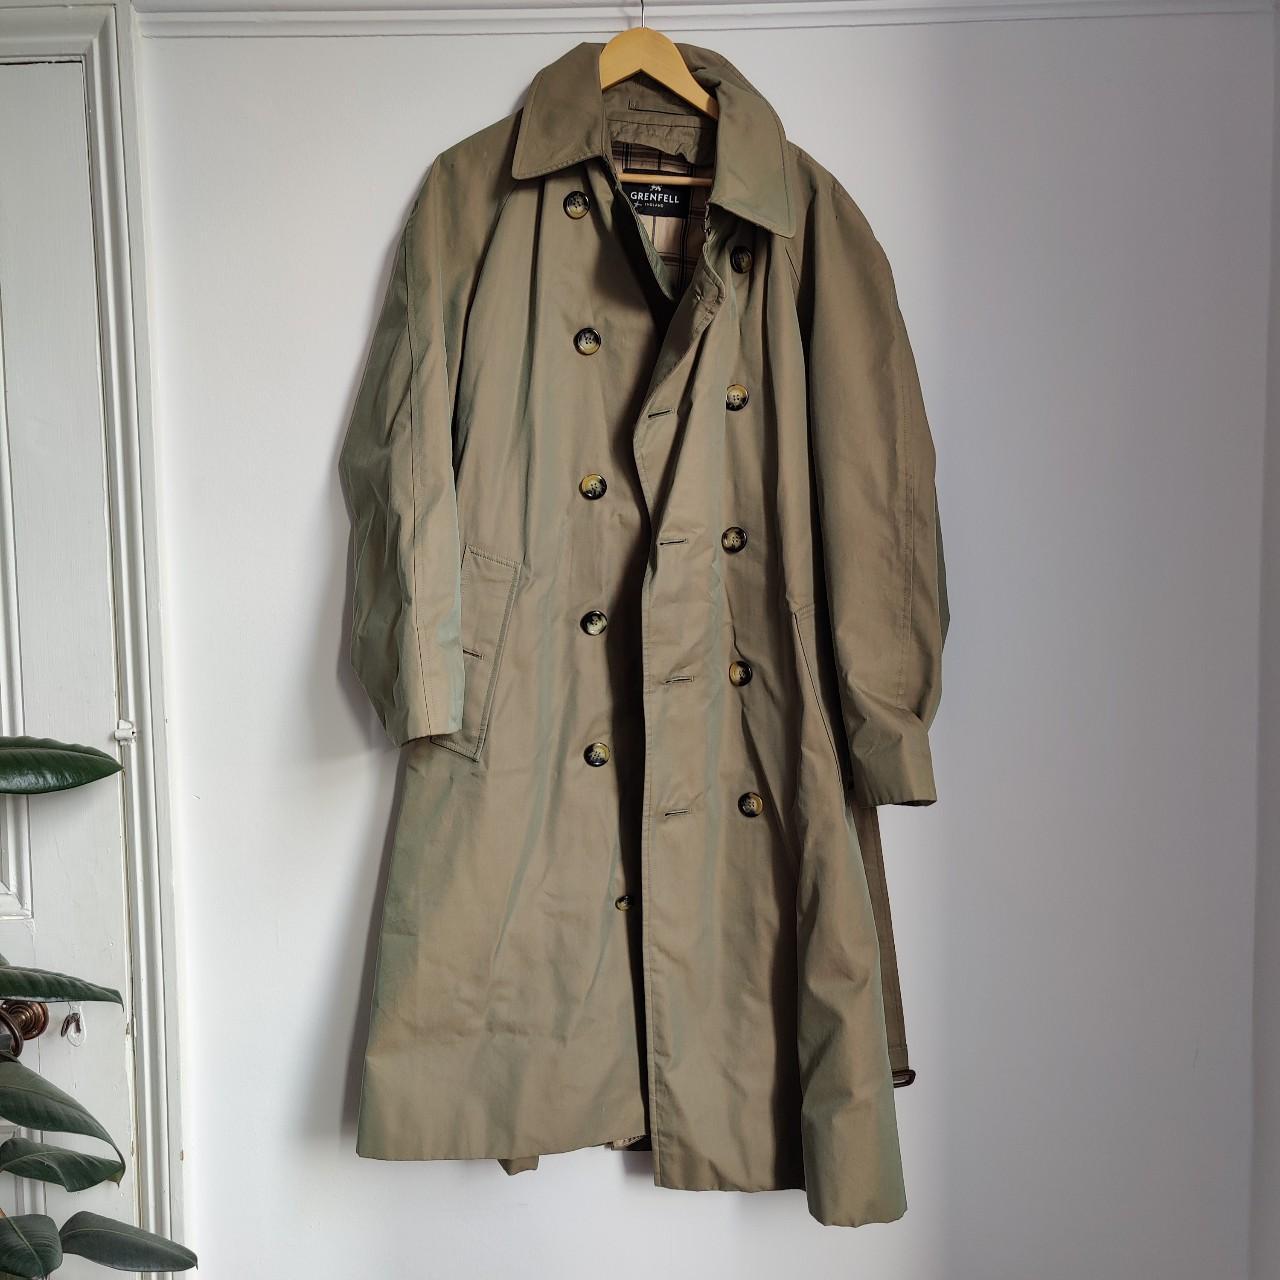 GRENFELL TRENCH COAT amazing quality trench from... - Depop